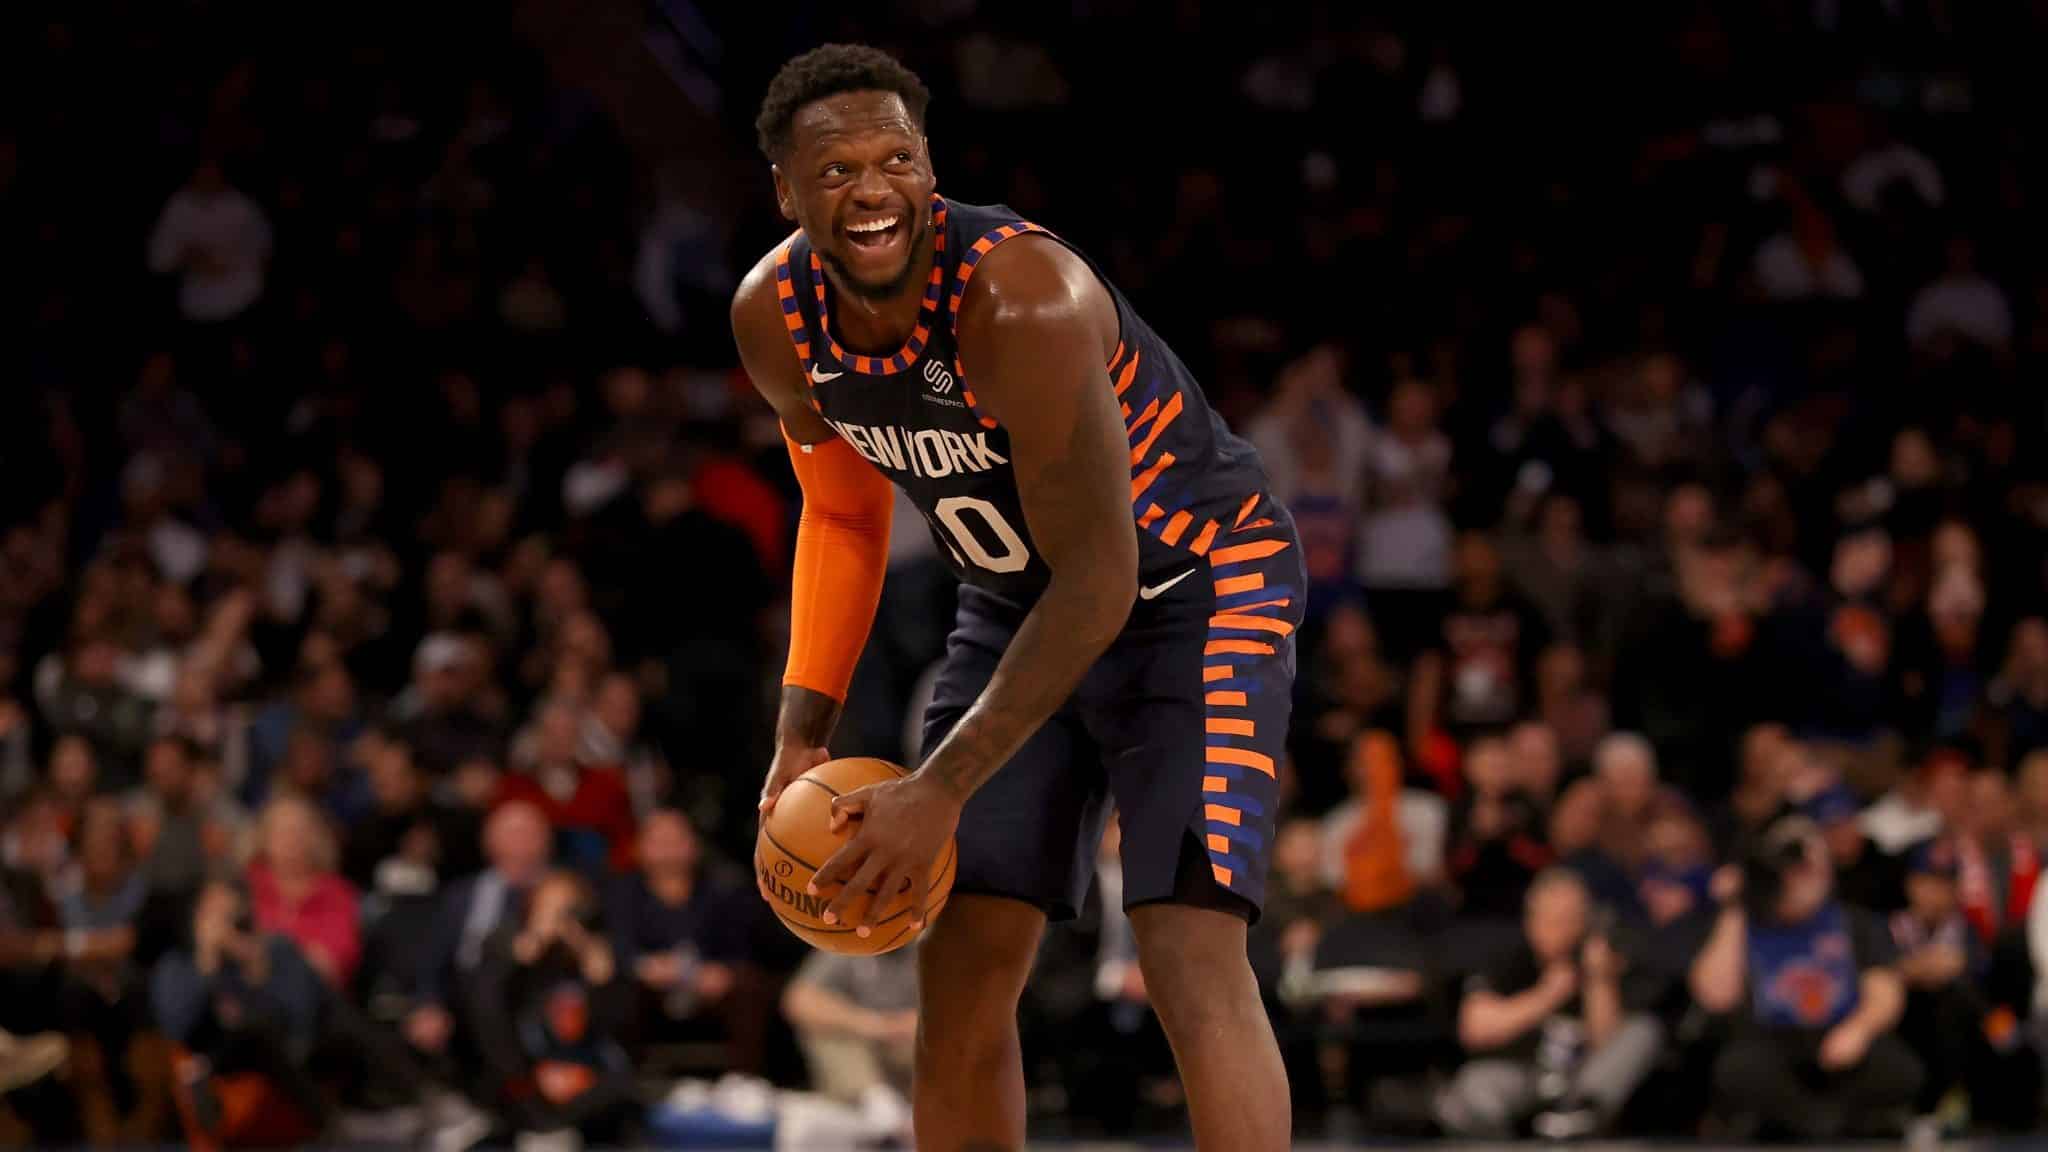 NEW YORK, NEW YORK - FEBRUARY 29: Julius Randle #30 of the New York Knicks smiles as he runs out the clock in the final minute of the game against the Chicago Bulls at Madison Square Garden on February 29, 2020 in New York City.The New York Knicks defeated the Chicago Bulls 125-115.NOTE TO USER: User expressly acknowledges and agrees that, by downloading and or using this photograph, User is consenting to the terms and conditions of the Getty Images License Agreement.